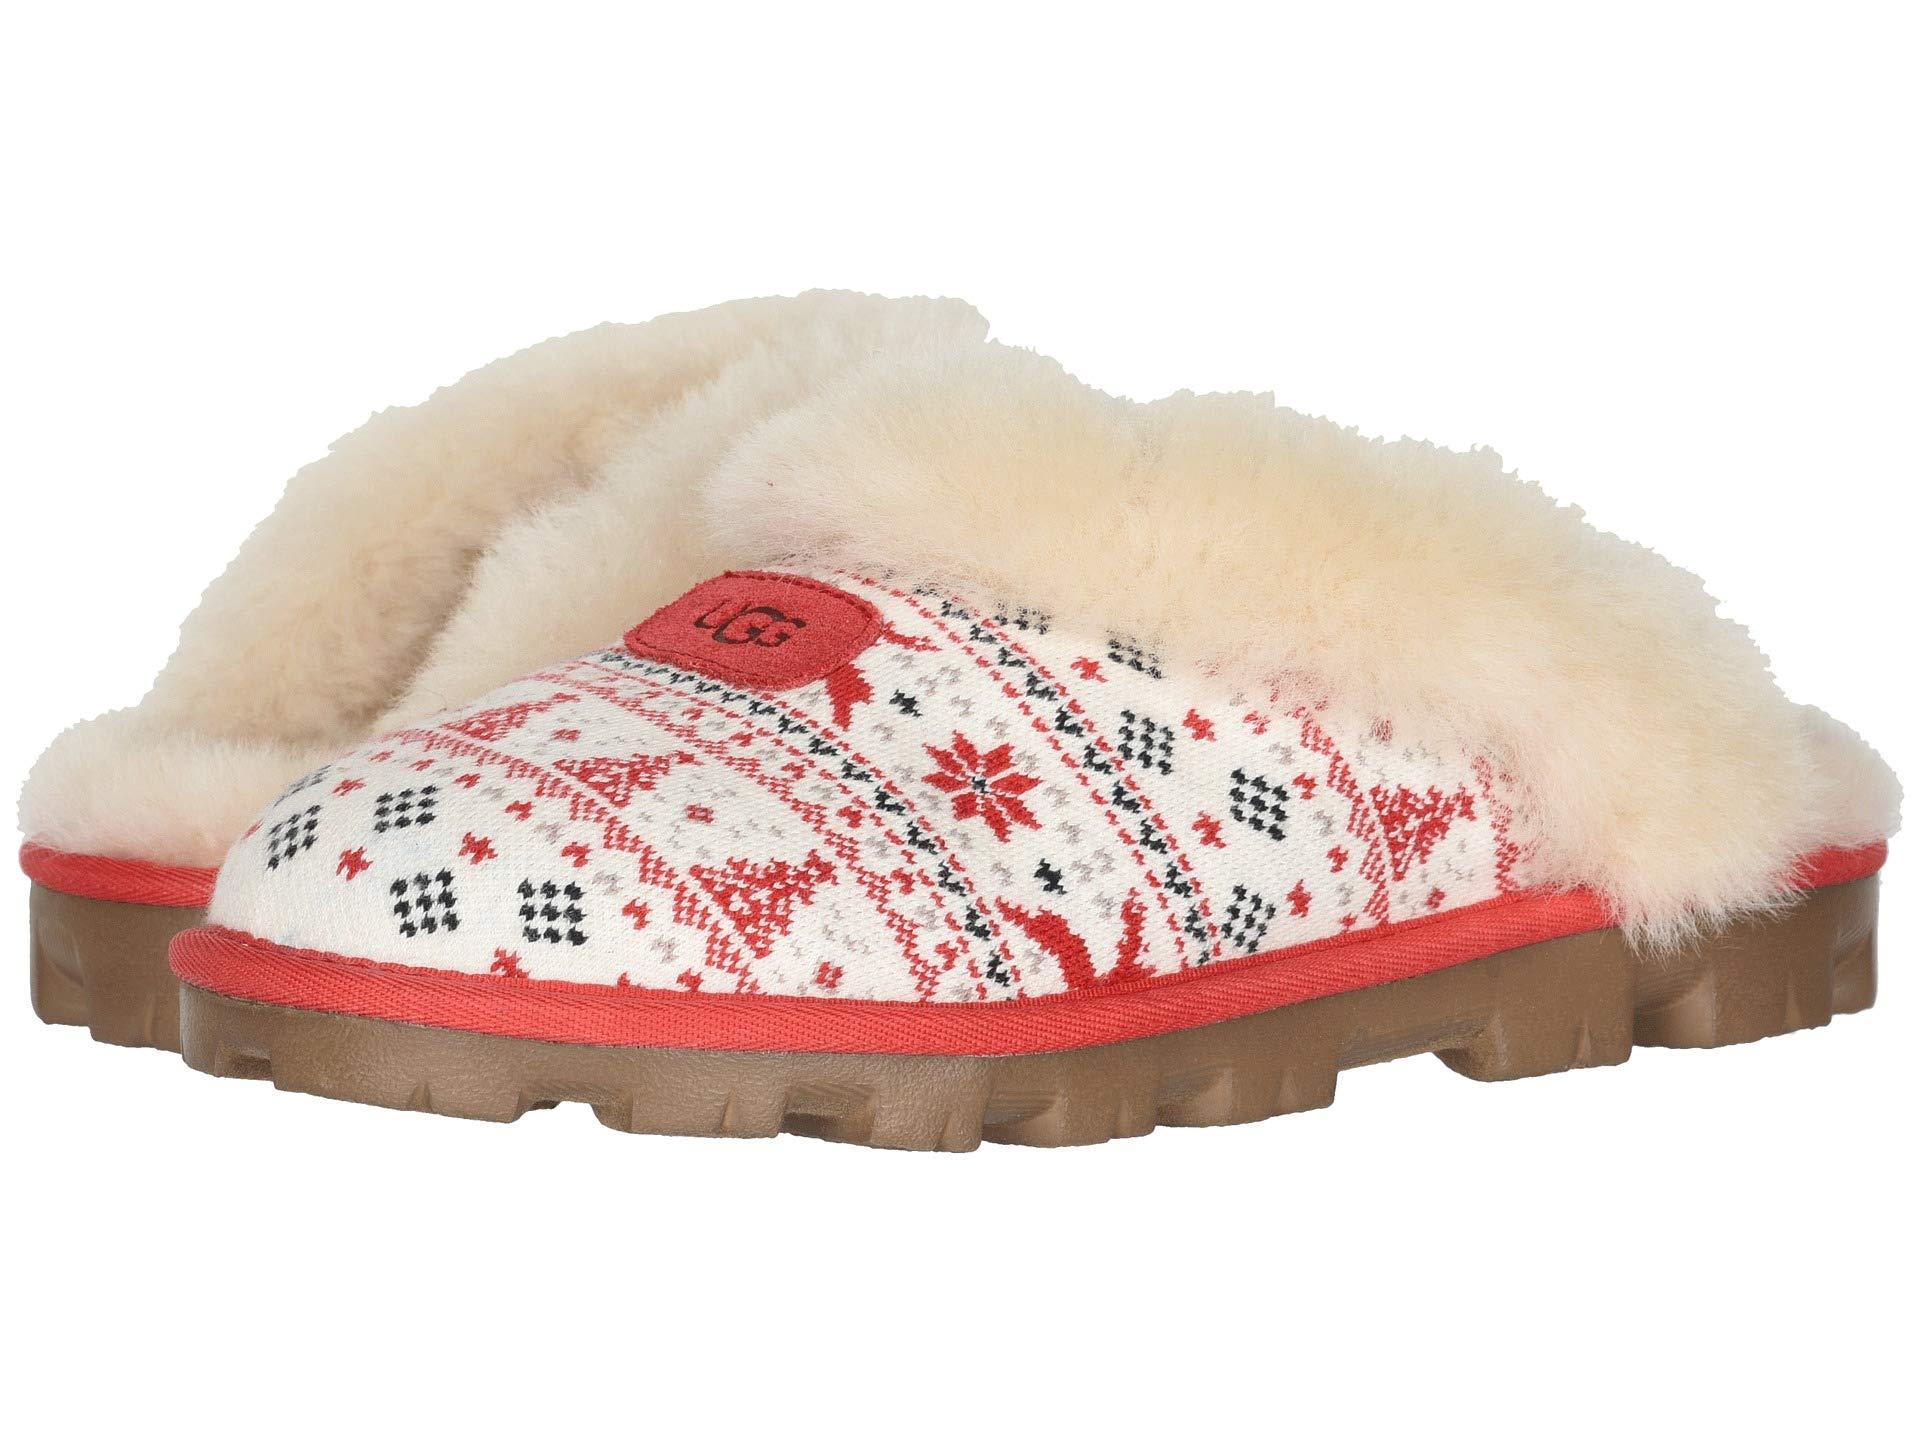 ugg sweater slippers